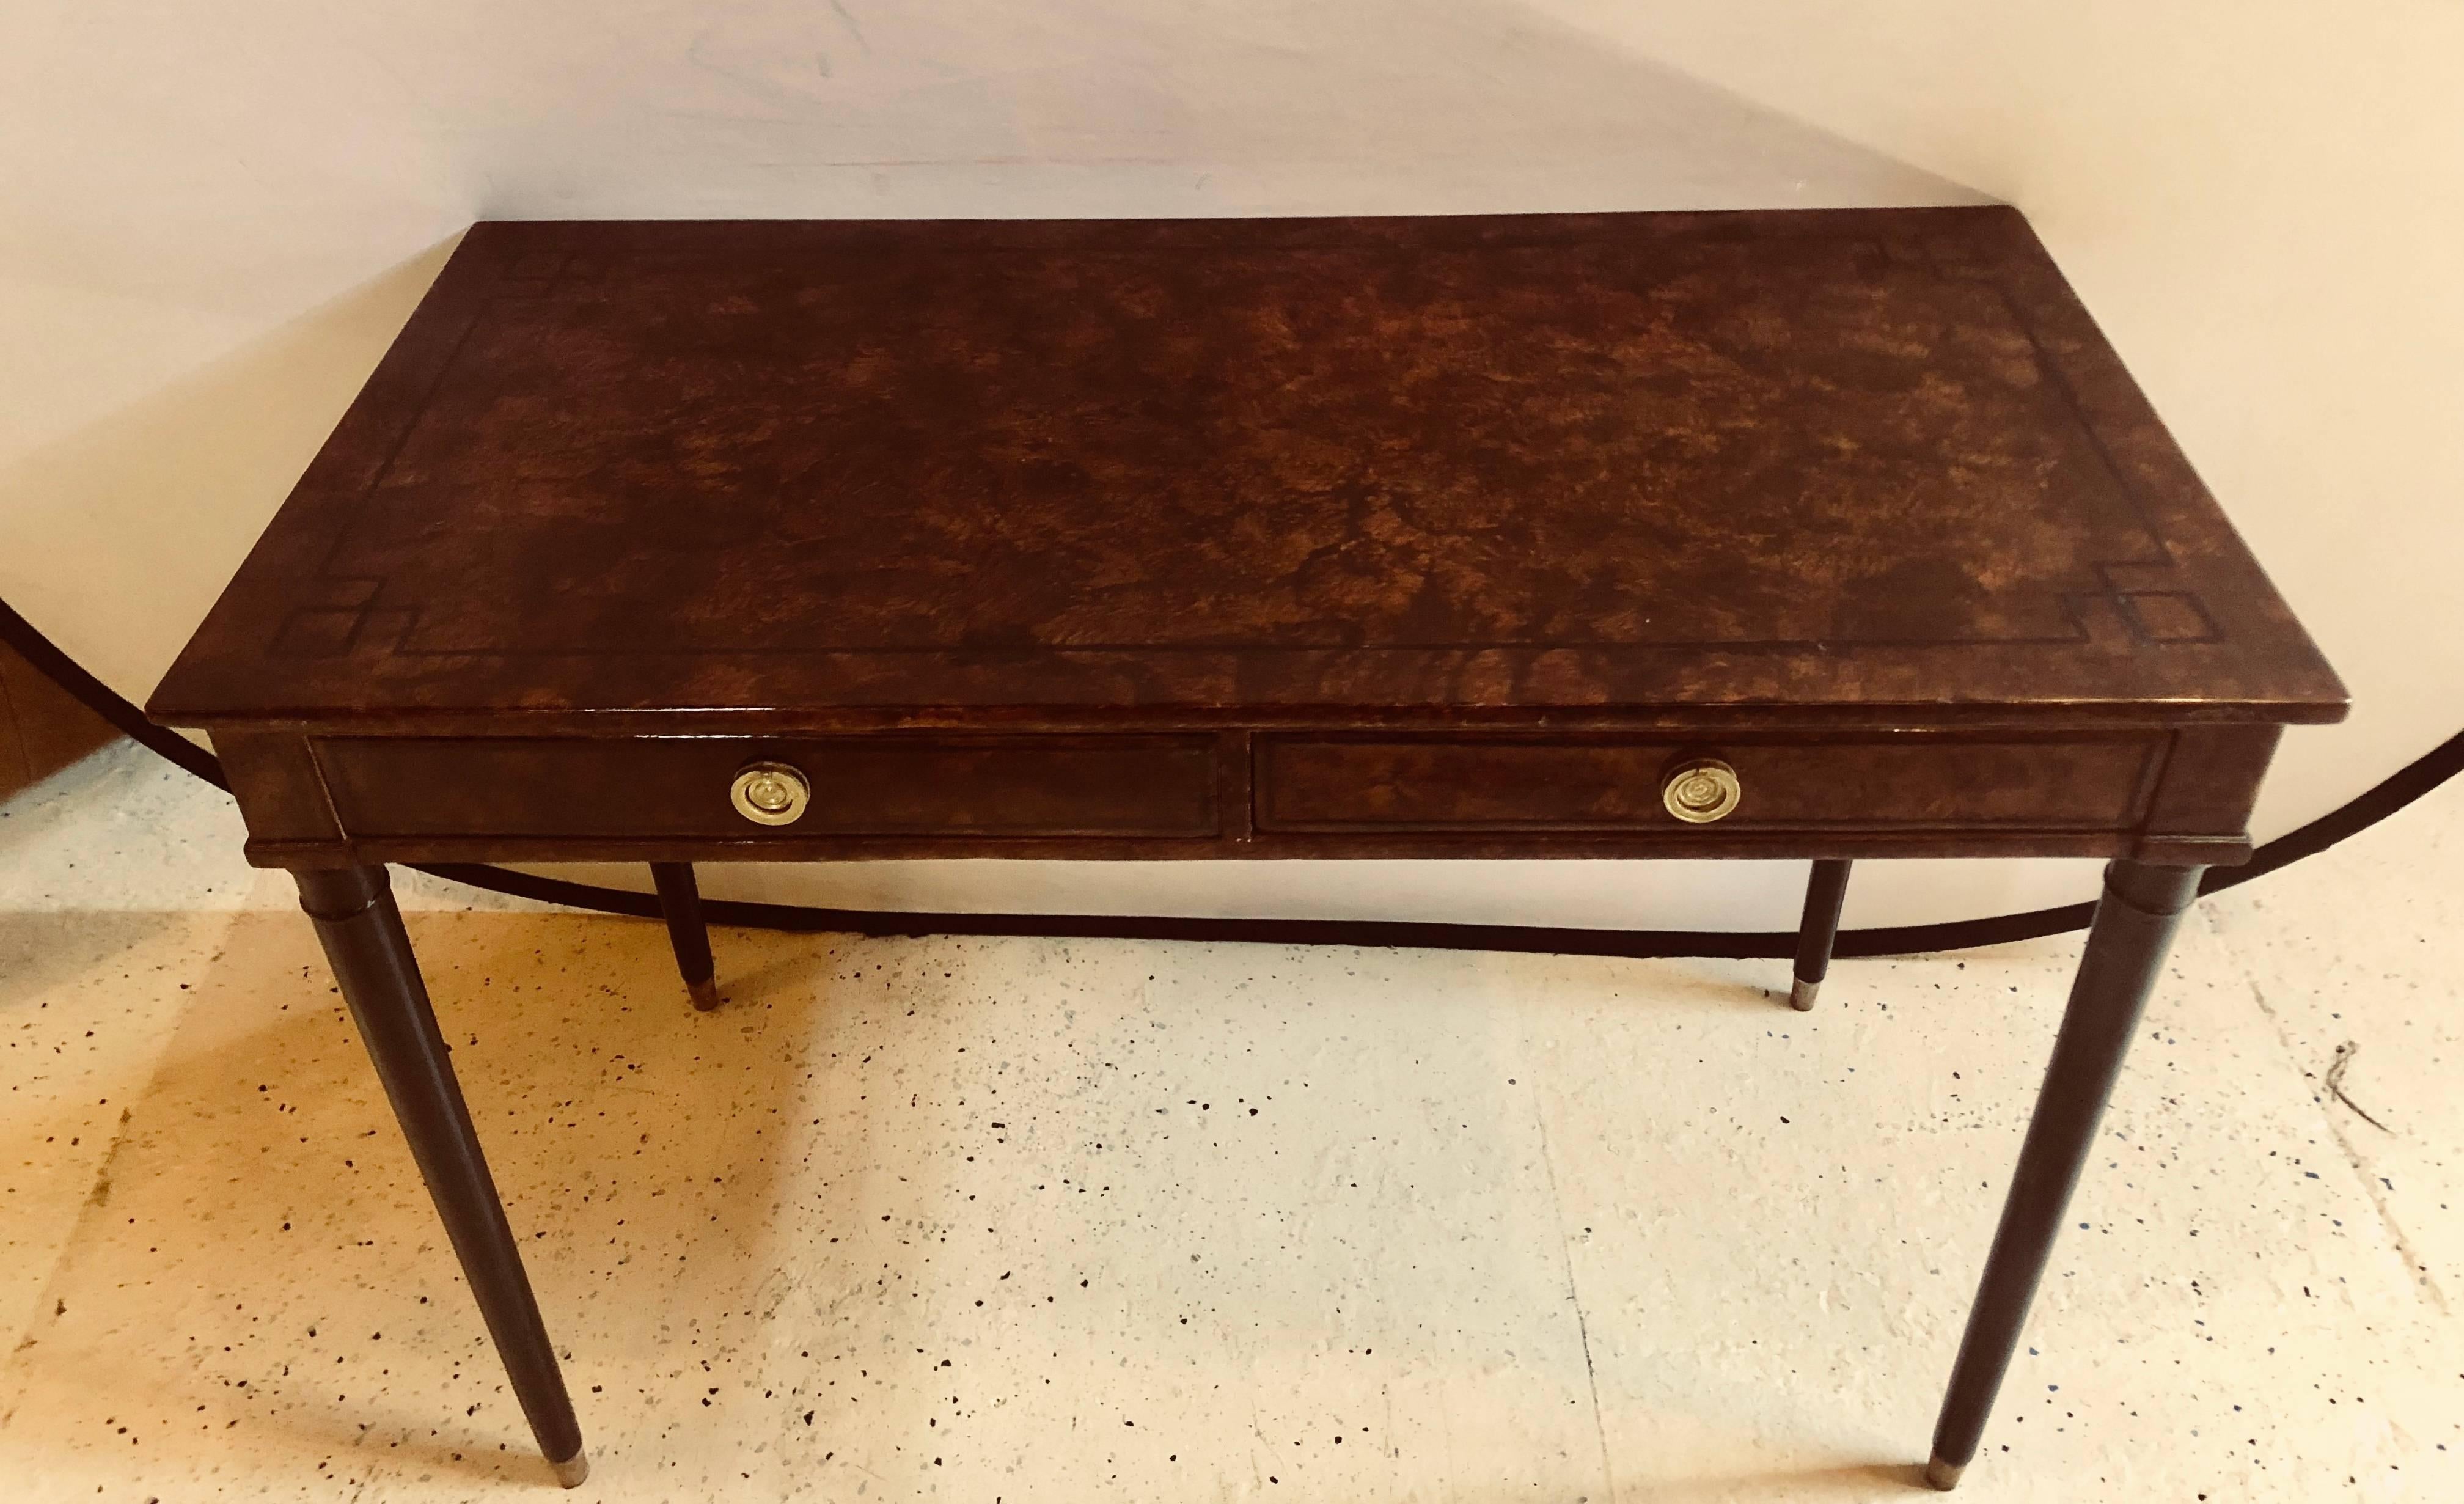 Hollywood Regency faux tortoise two-drawer desk or vanity having Greek key ebony design. This sheik and stylish designed desk or writing table is simply stunning and depicts the Hollywood Regency era of glamour at its highest peak. The top and apron